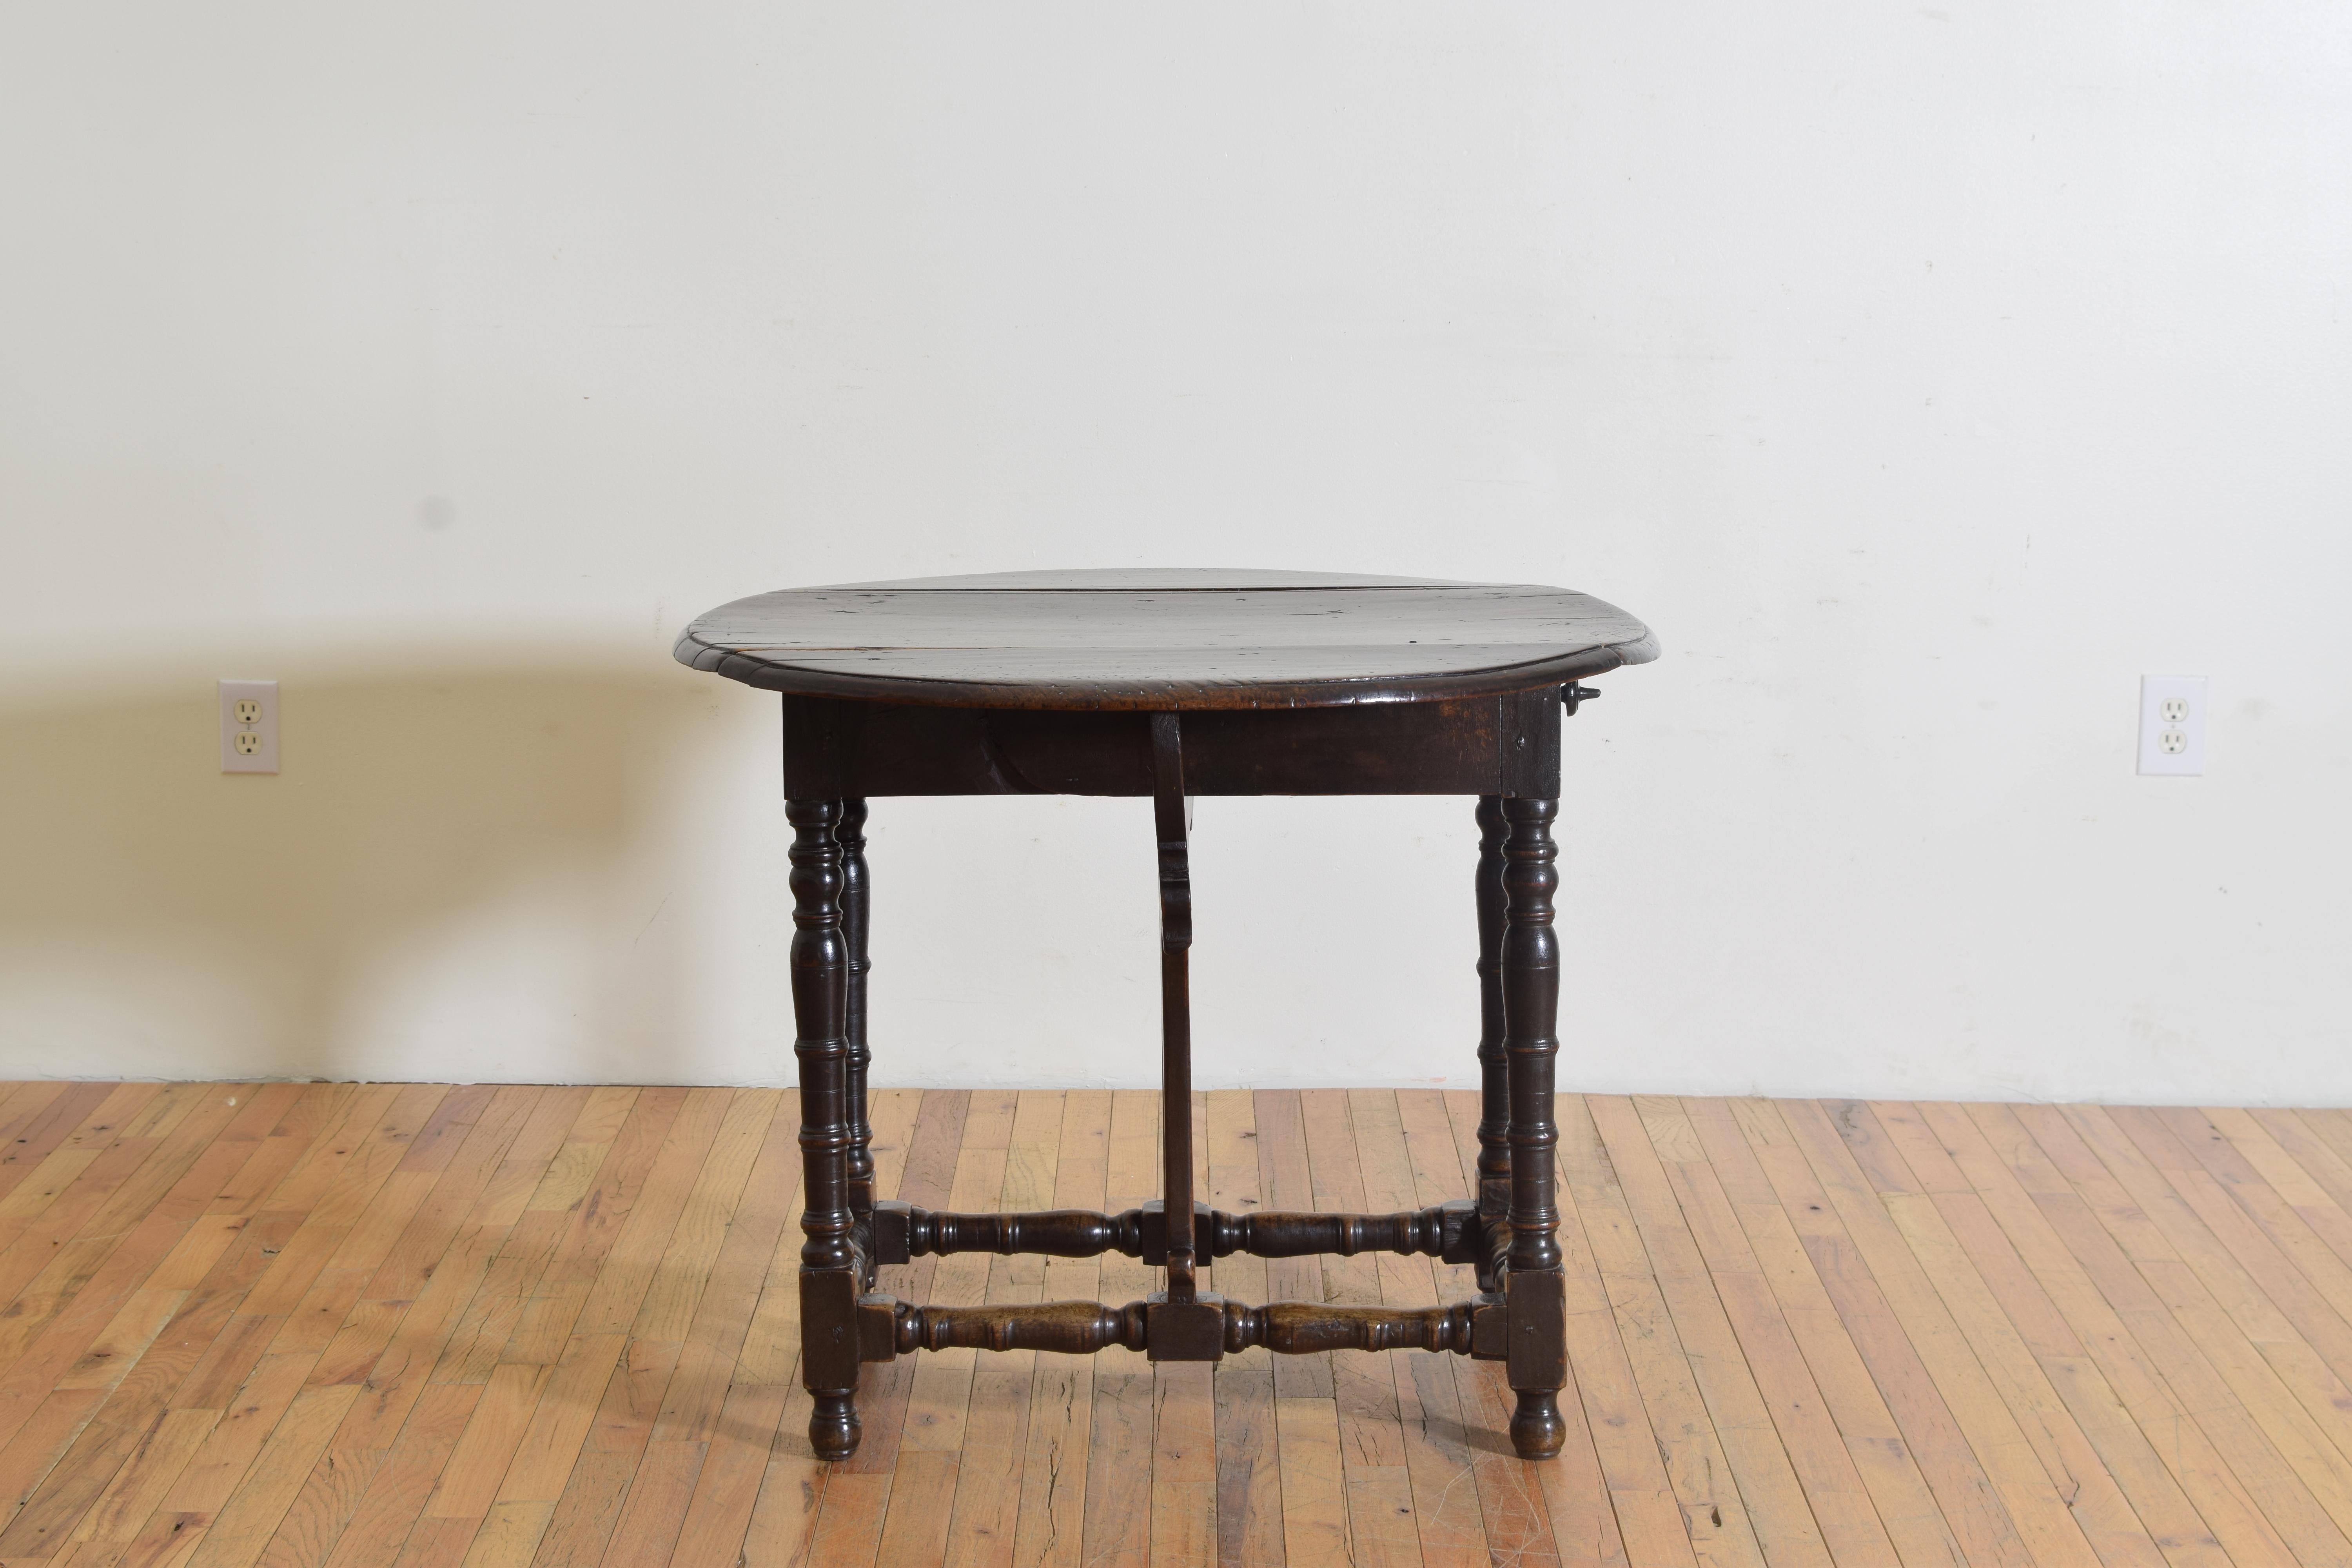 Italian Louis XIV Period Walnut Drop Leaf 1-Drawer Table, early 18th century For Sale 1